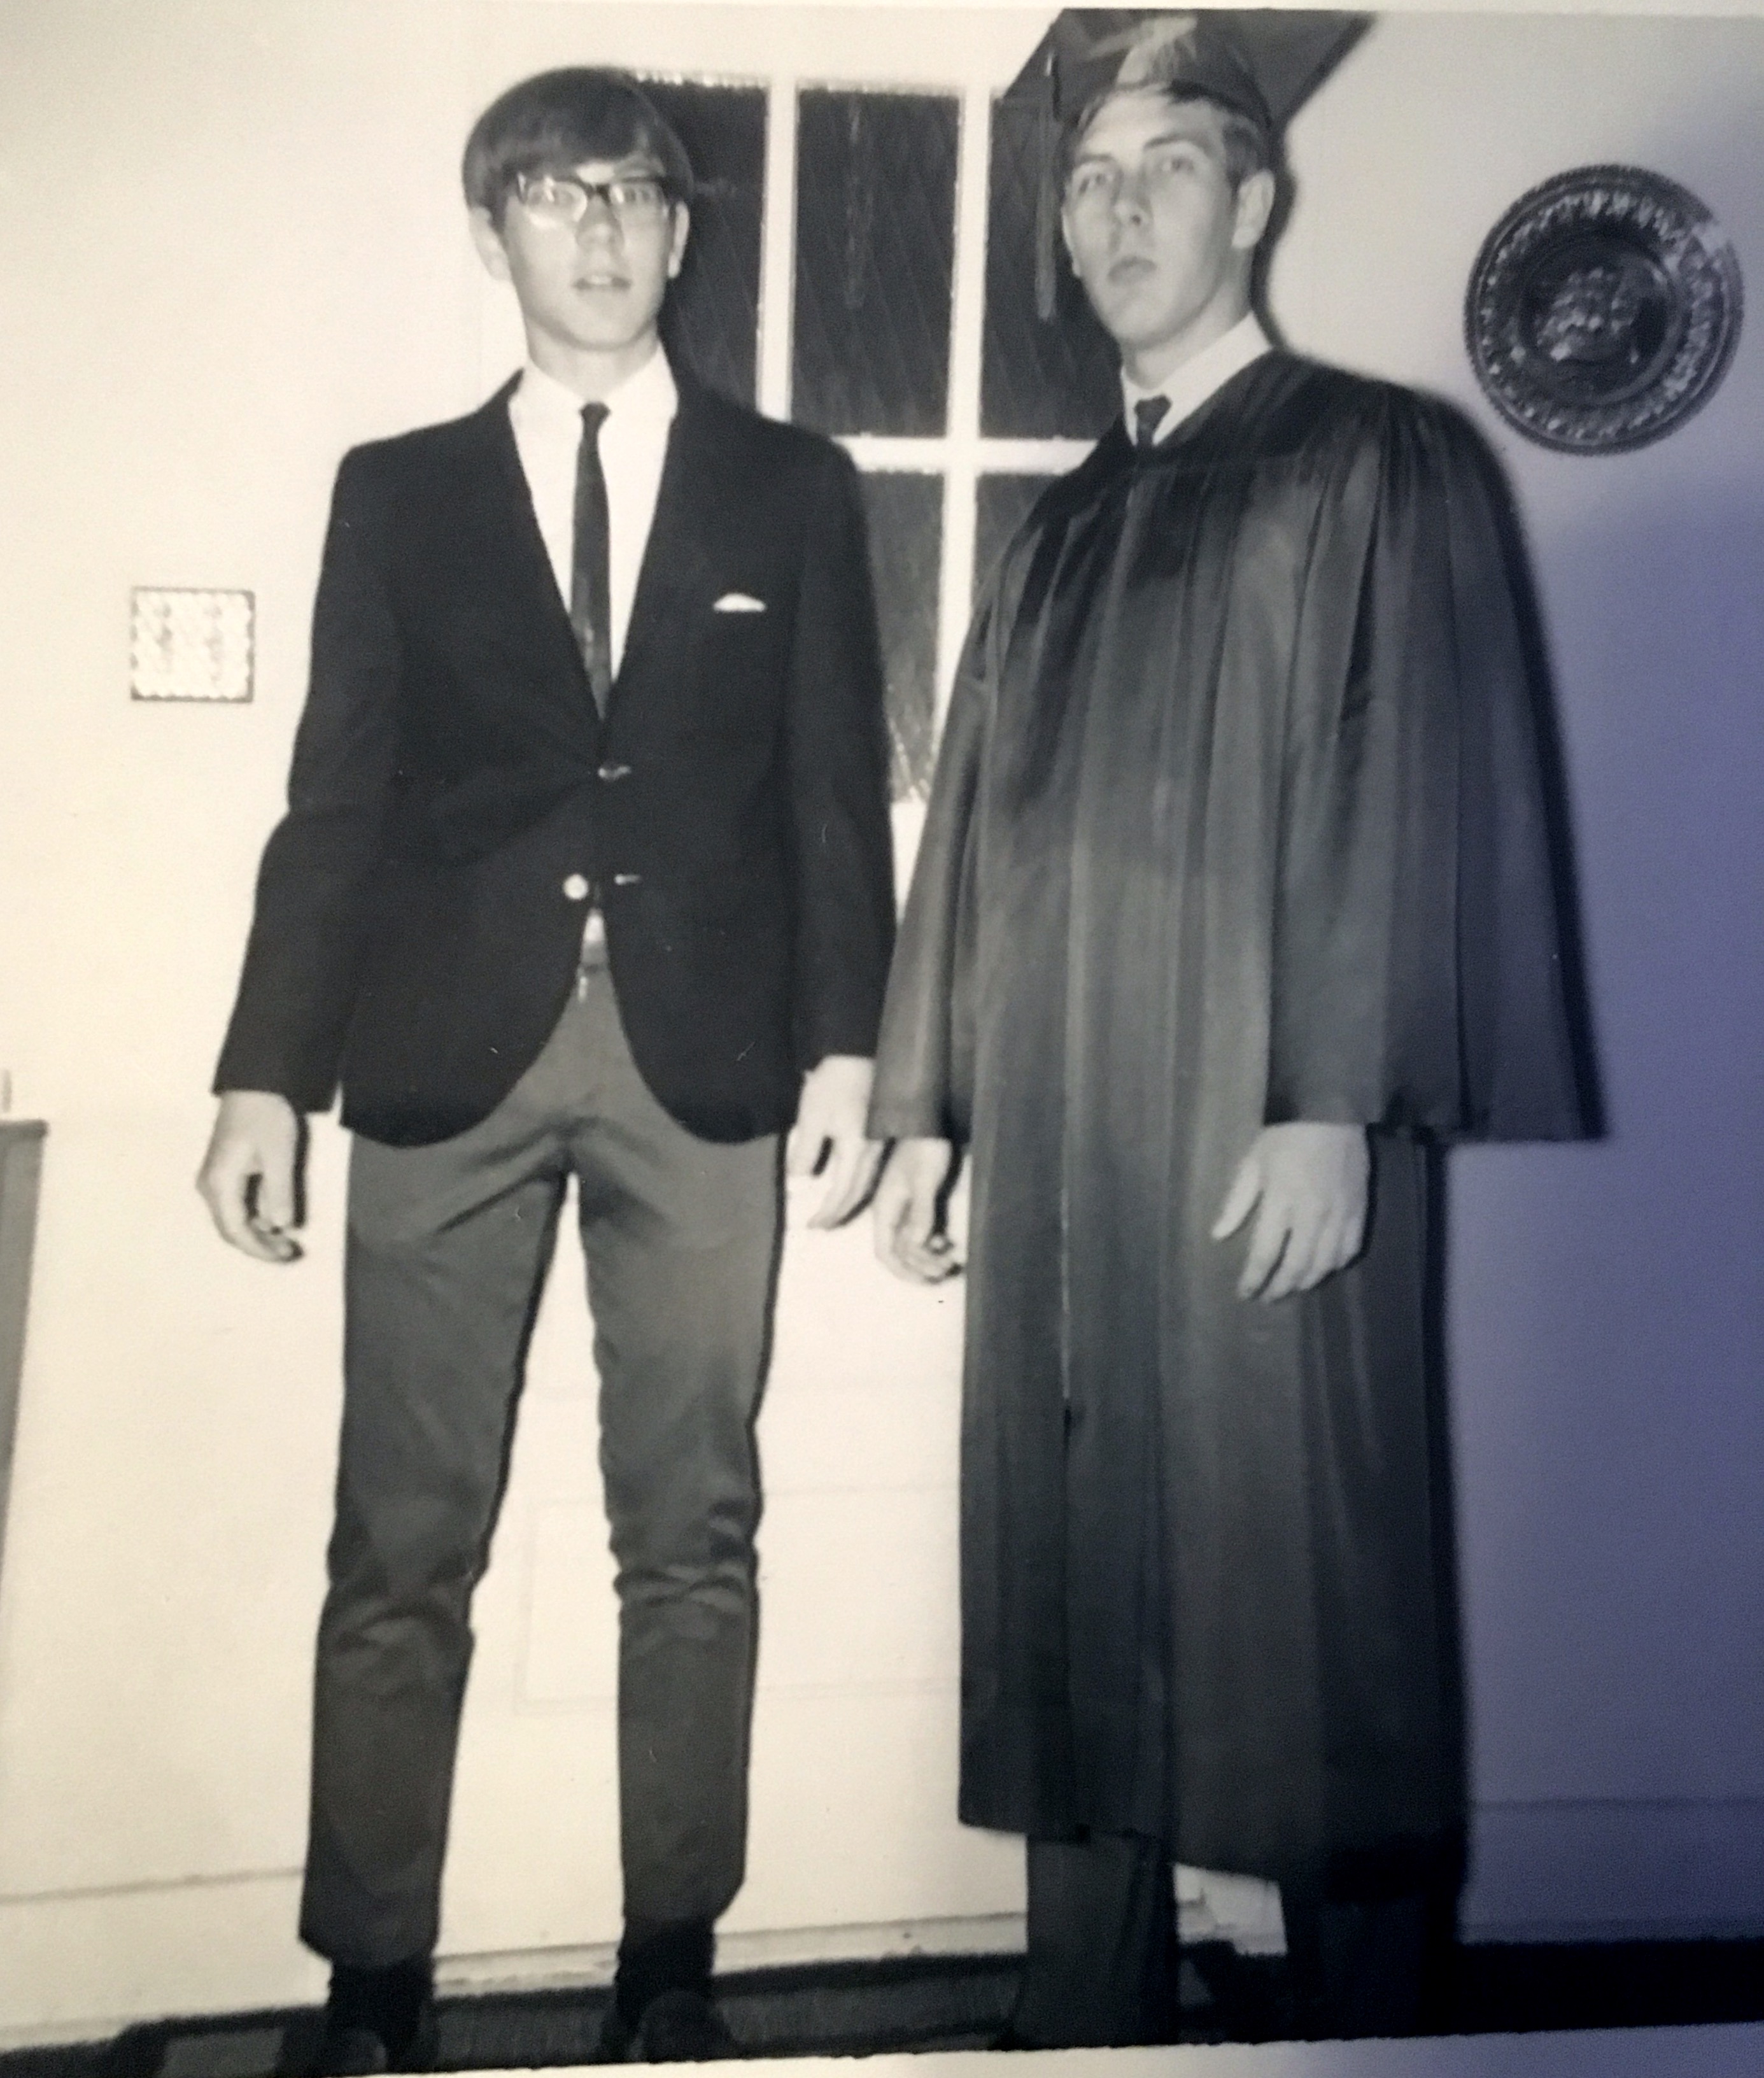 Brother Bill and I at home in Des Moines after my graduation May 1968.  